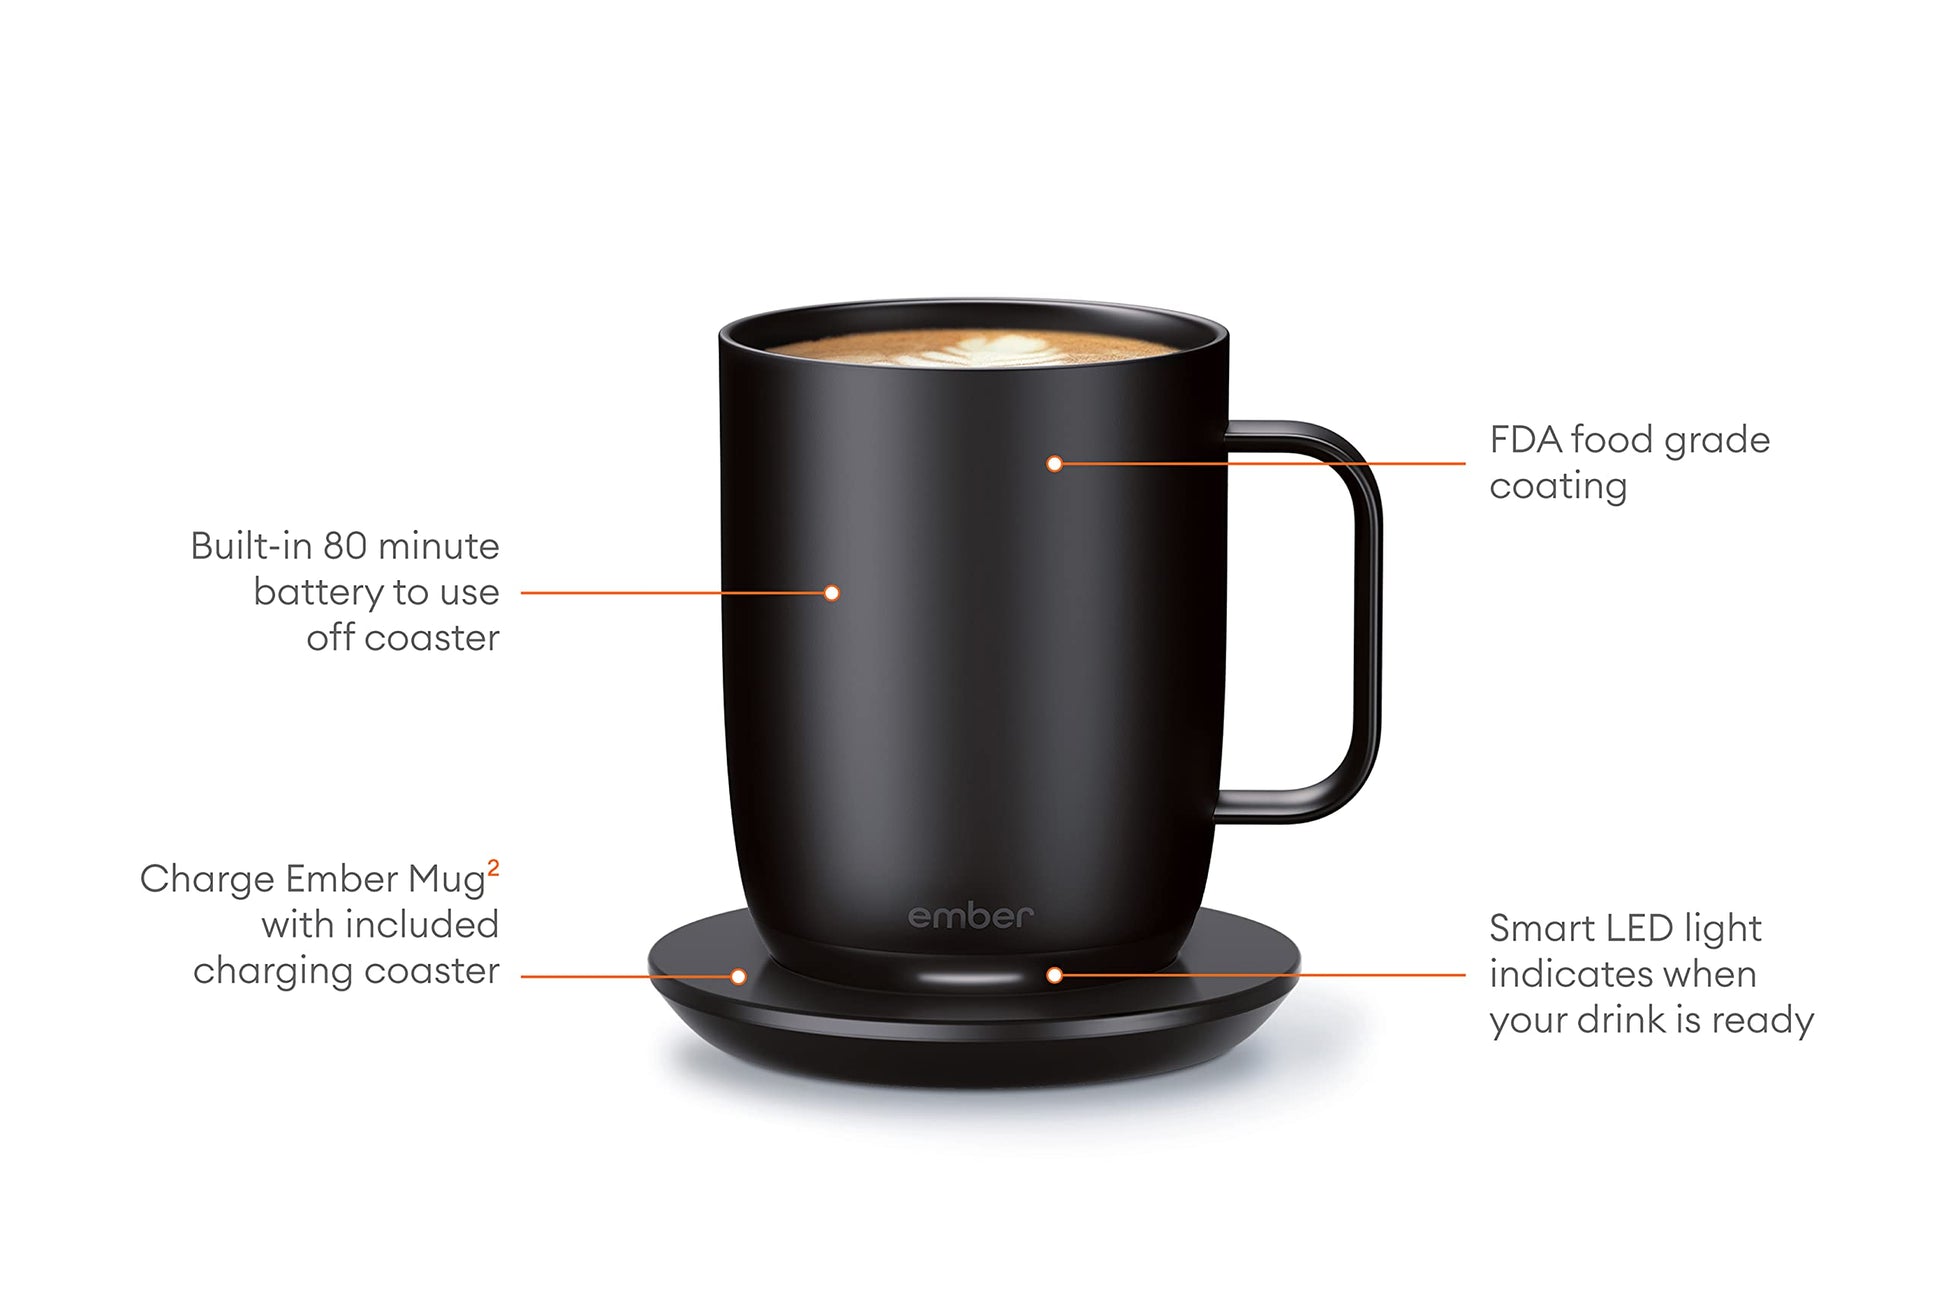 Ember Temperature Control Smart Mug 2, 14 Oz, App-Controlled Heated Coffee Mug with 80 Min Battery Life and Improved Design, Black Ember